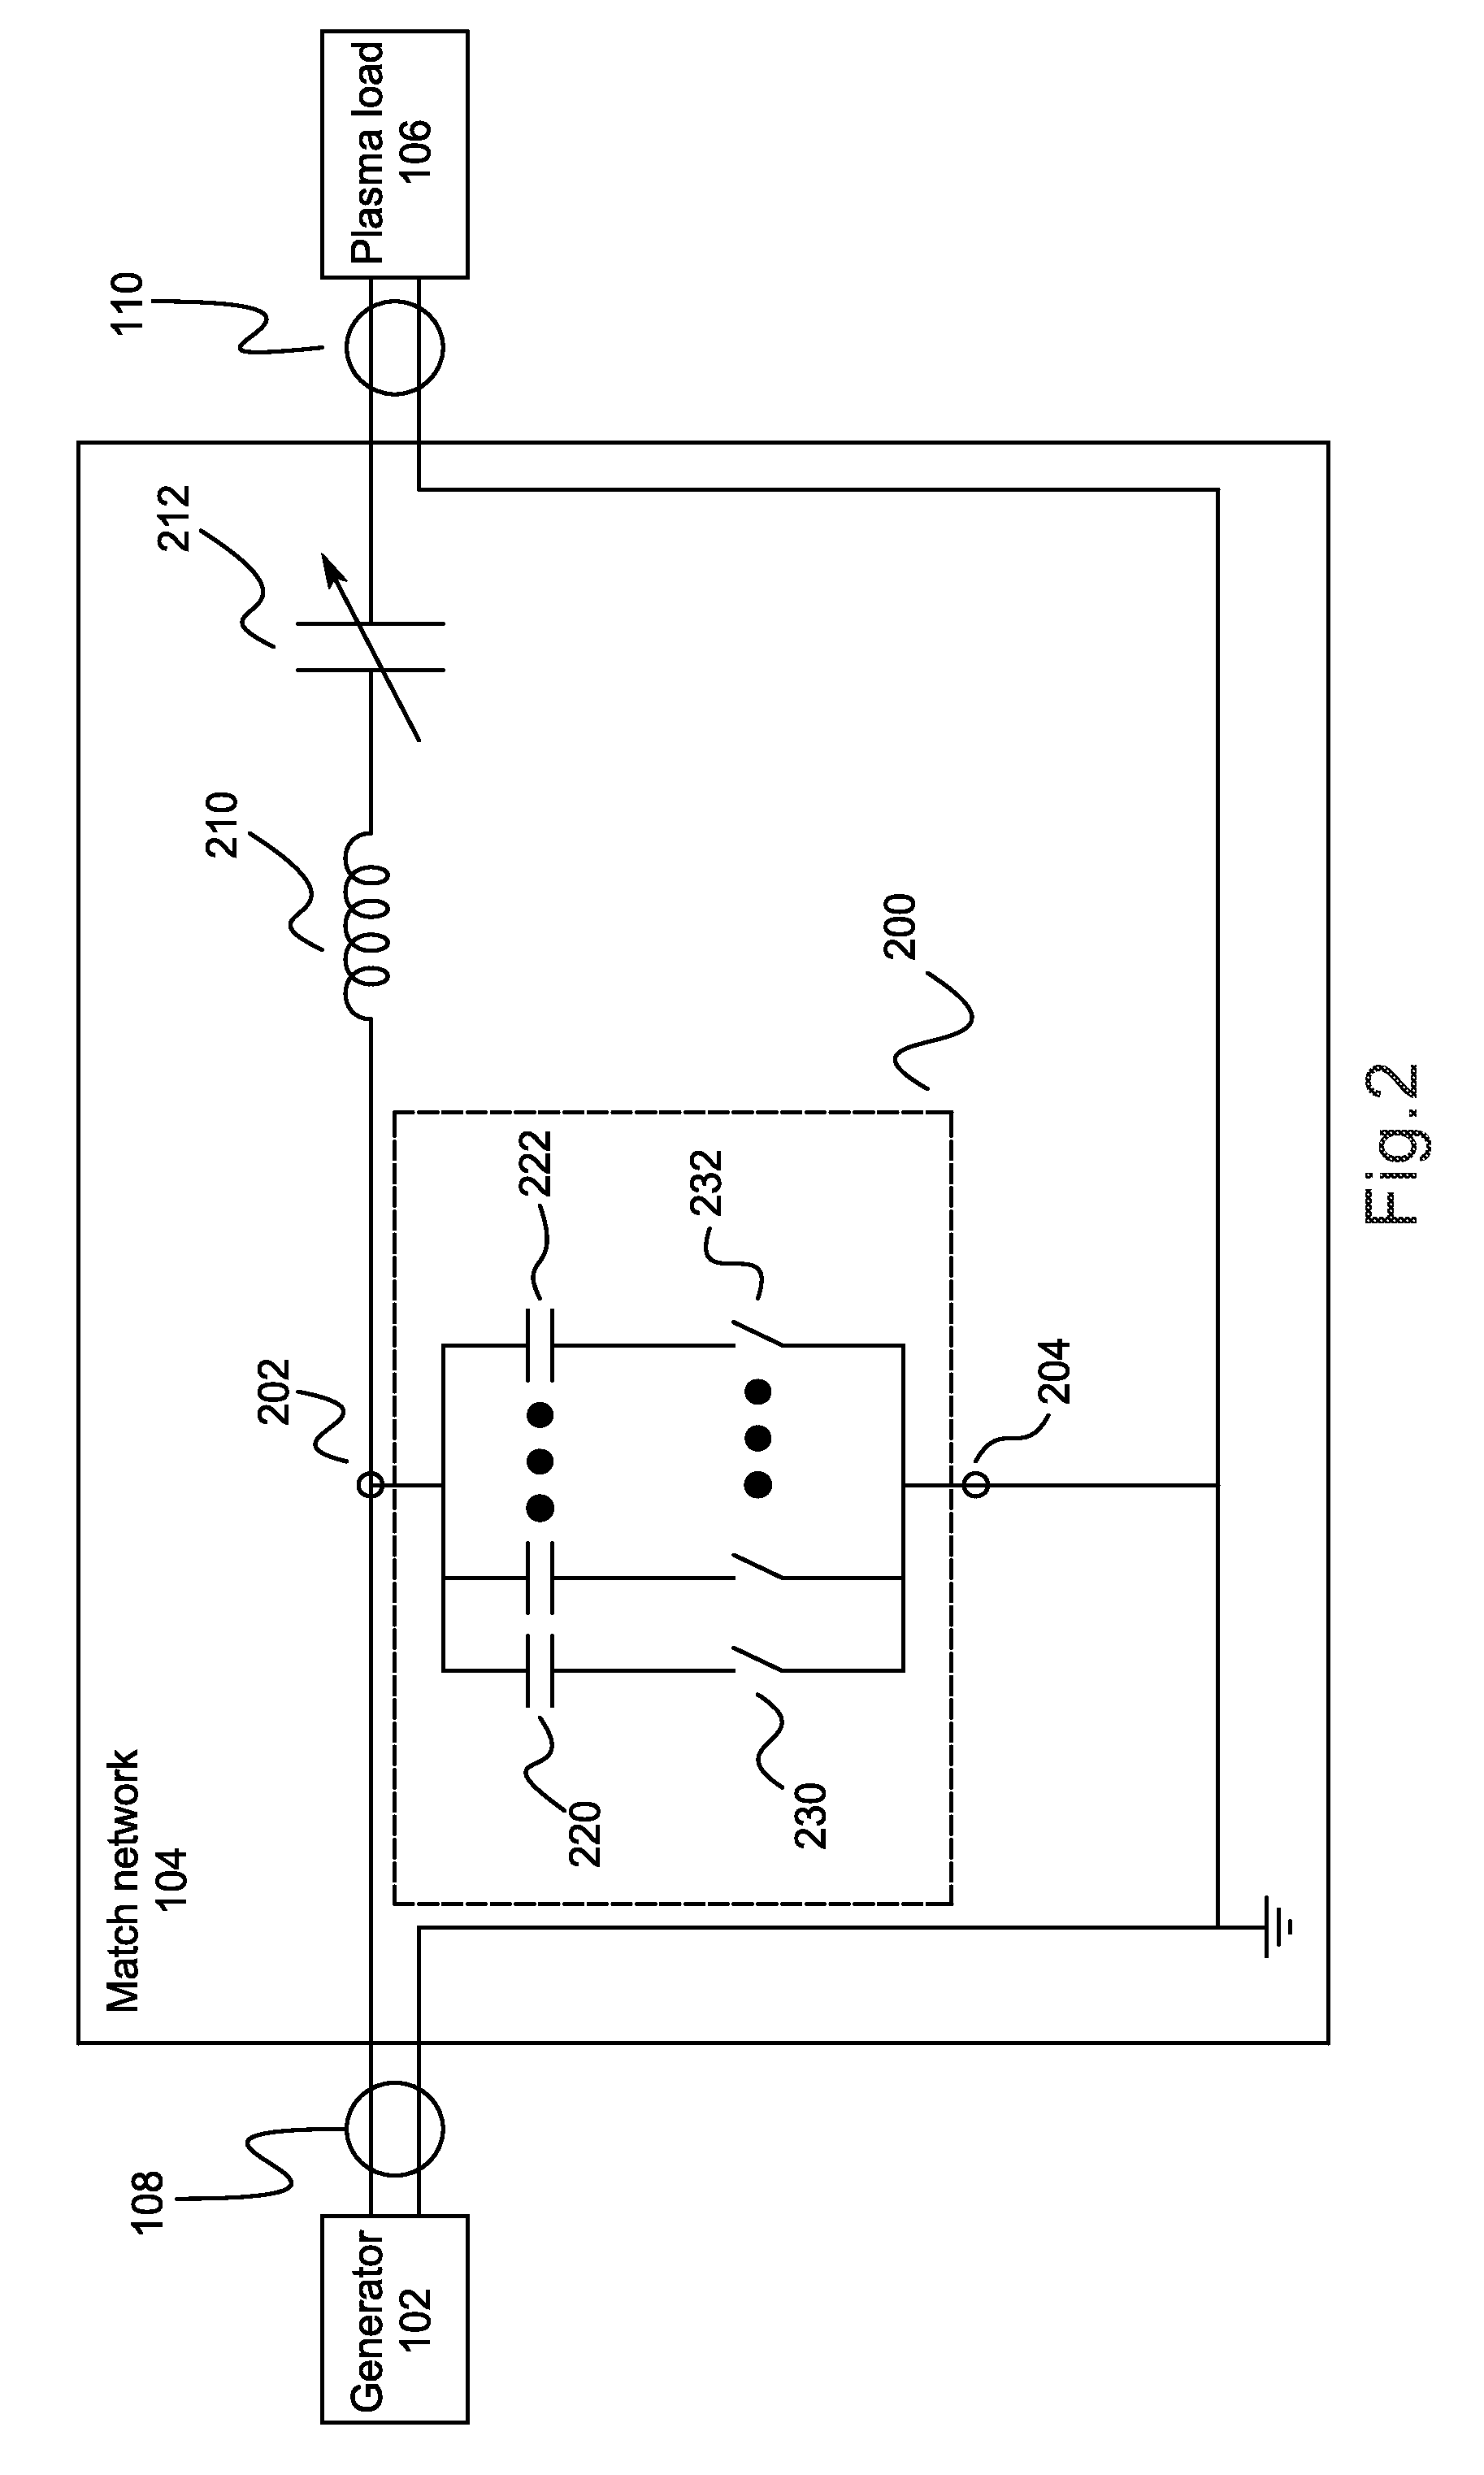 Impedance-matching network using BJT switches in variable-reactance circuits